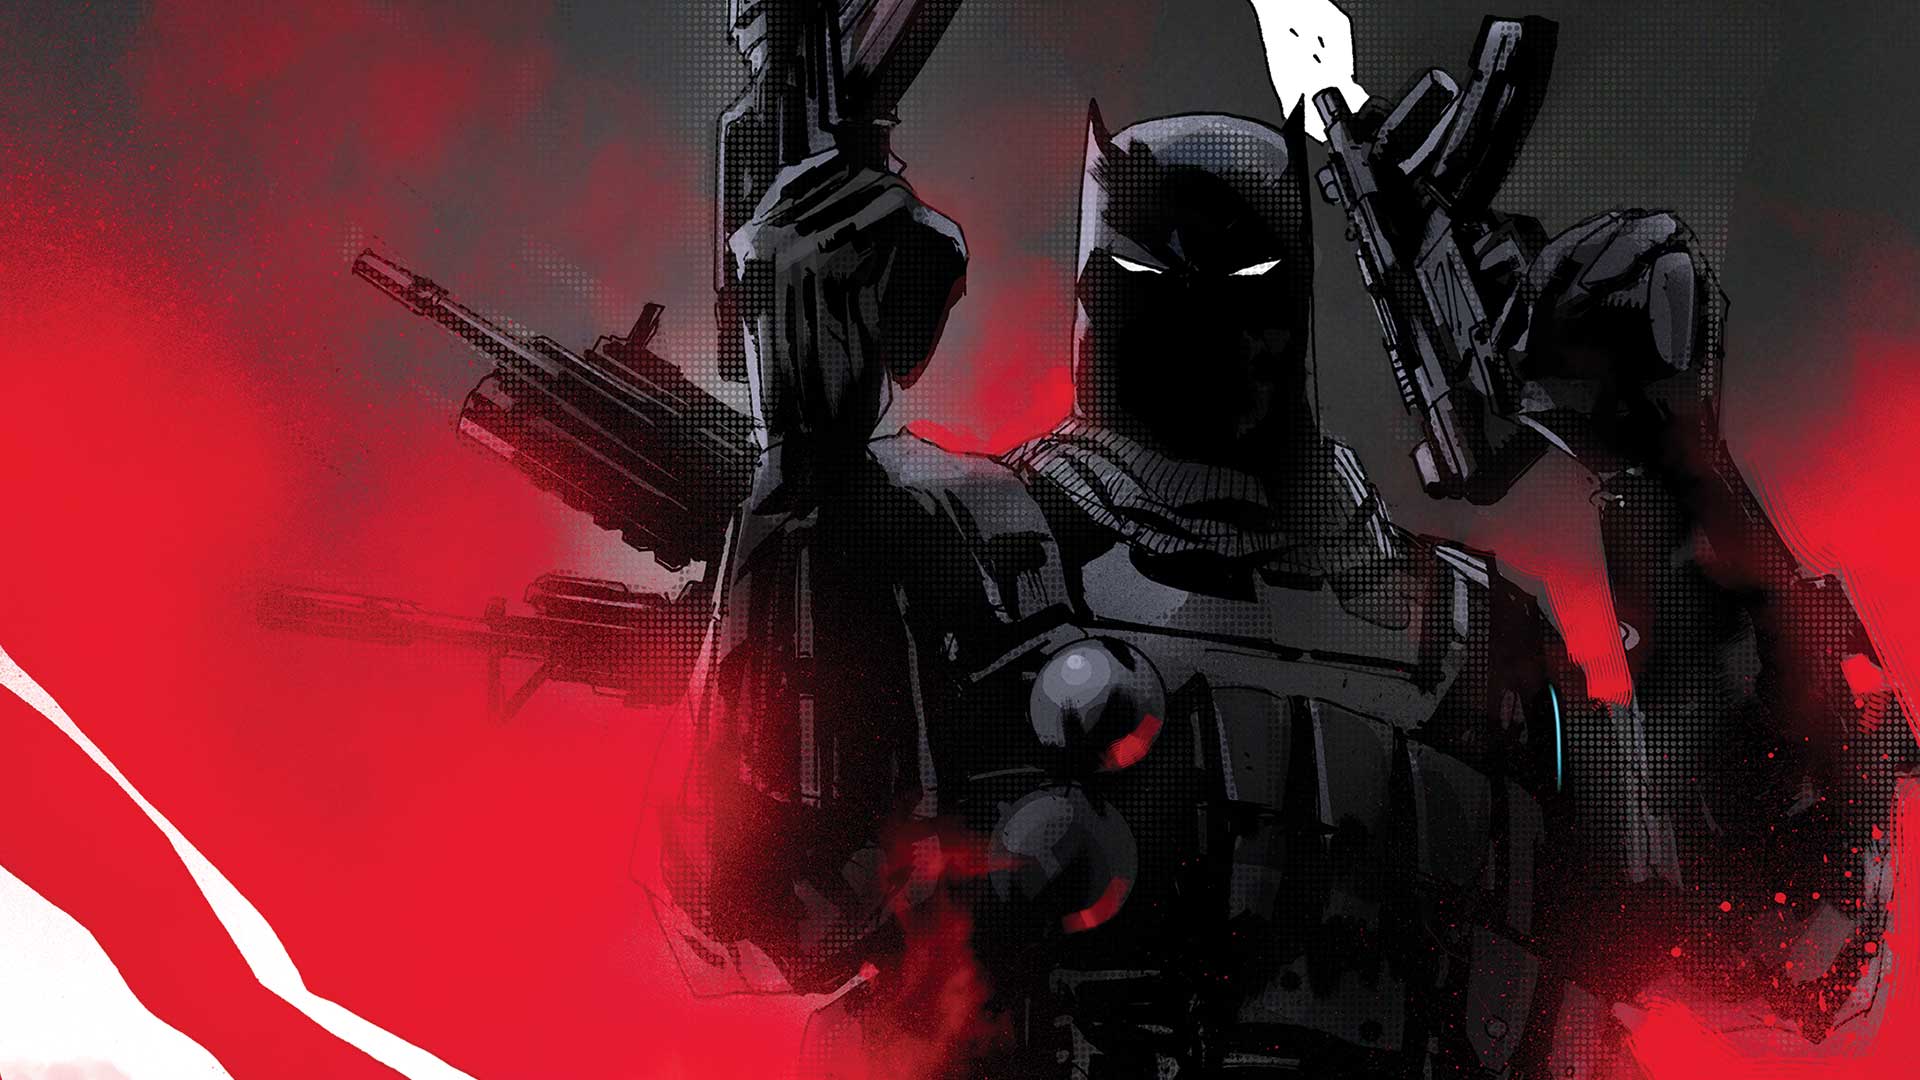 The Batman Who Laughs: The Grim Knight #1 review